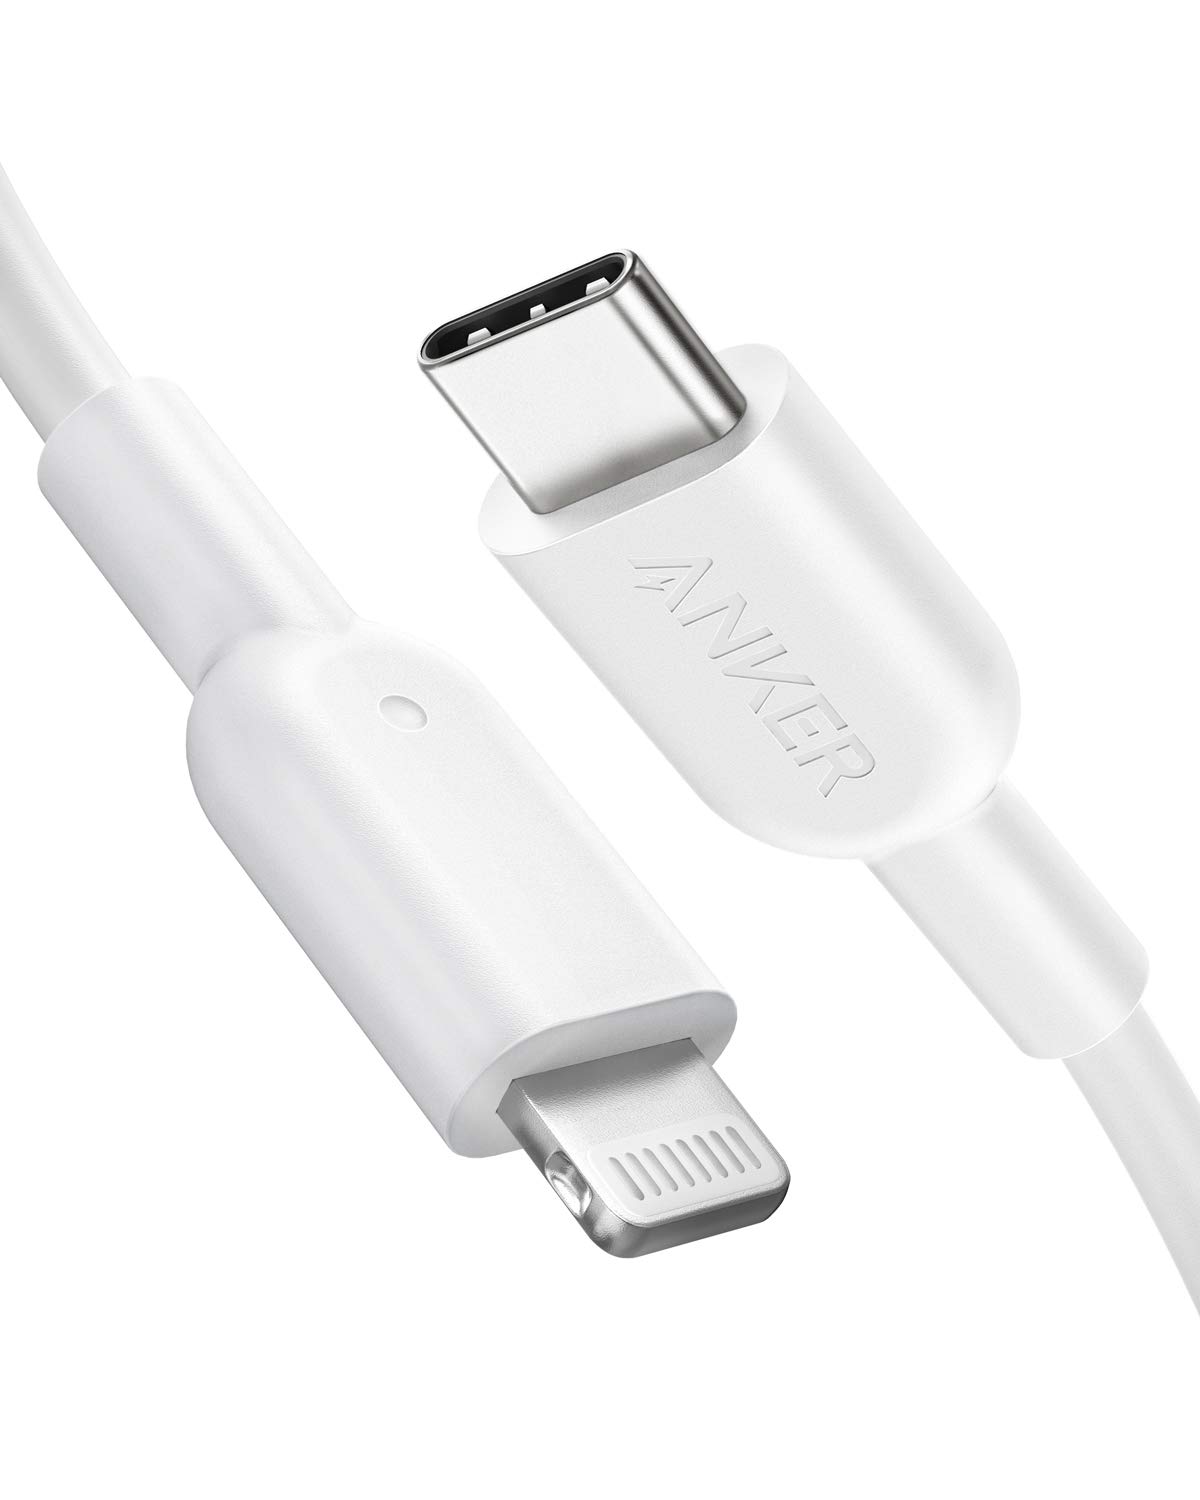 Apple is going with the USB-C ports